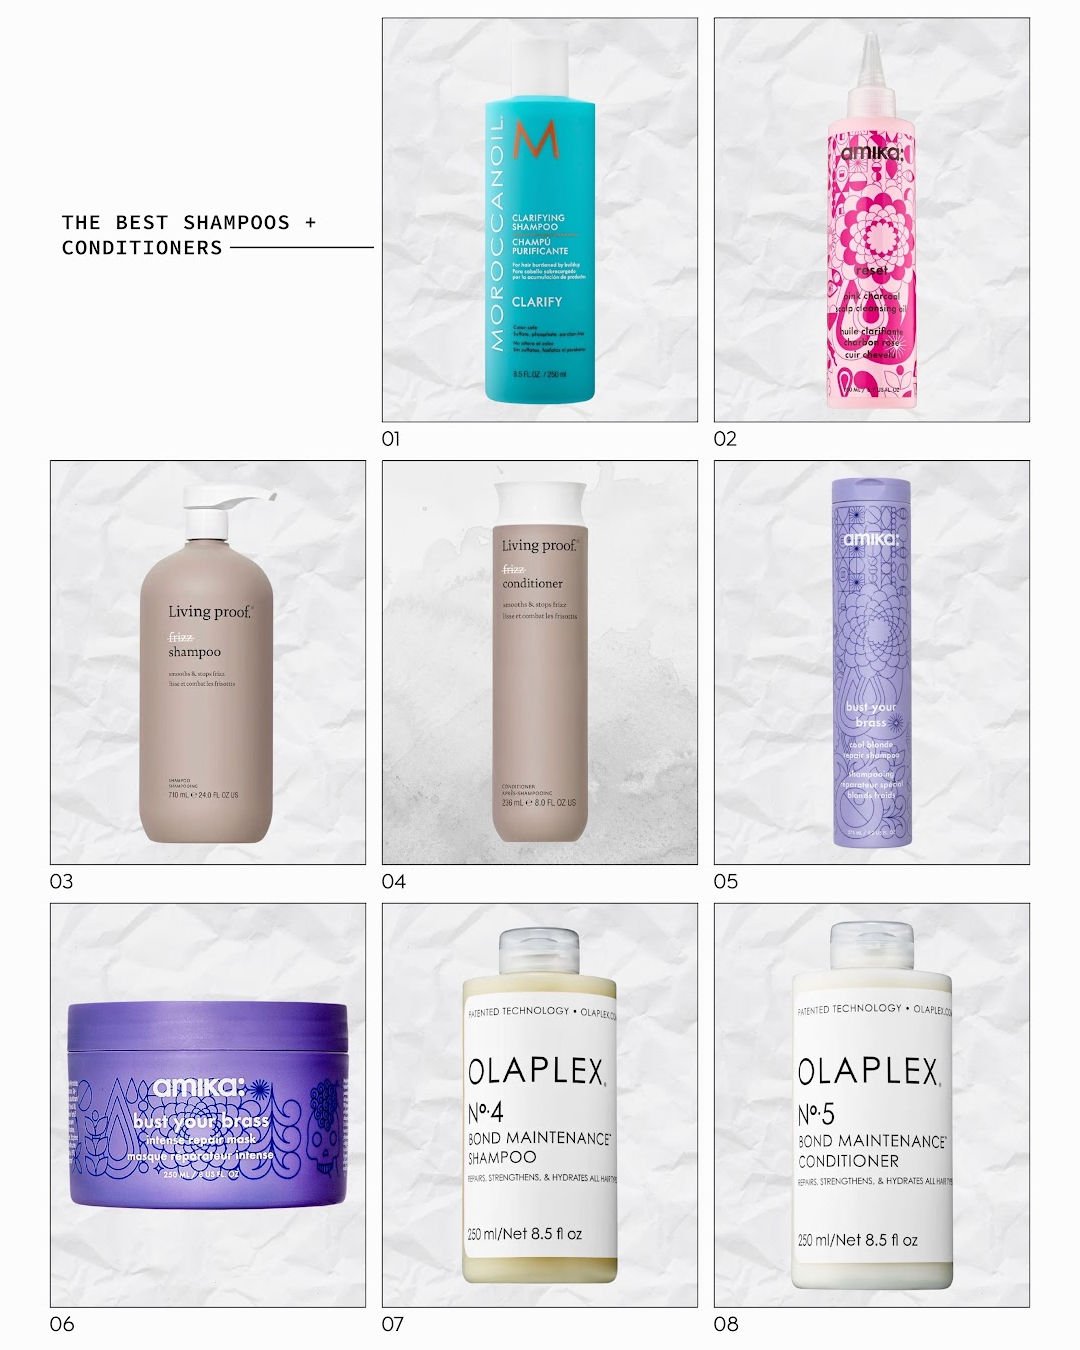 The best shampoos and conditioners. Hair mask, hair products, shampoo and conditioner, shampoo for blonde hair, shampoo for fine thin hair, shampoo for highlighted hair, shampoo for ash brown hair